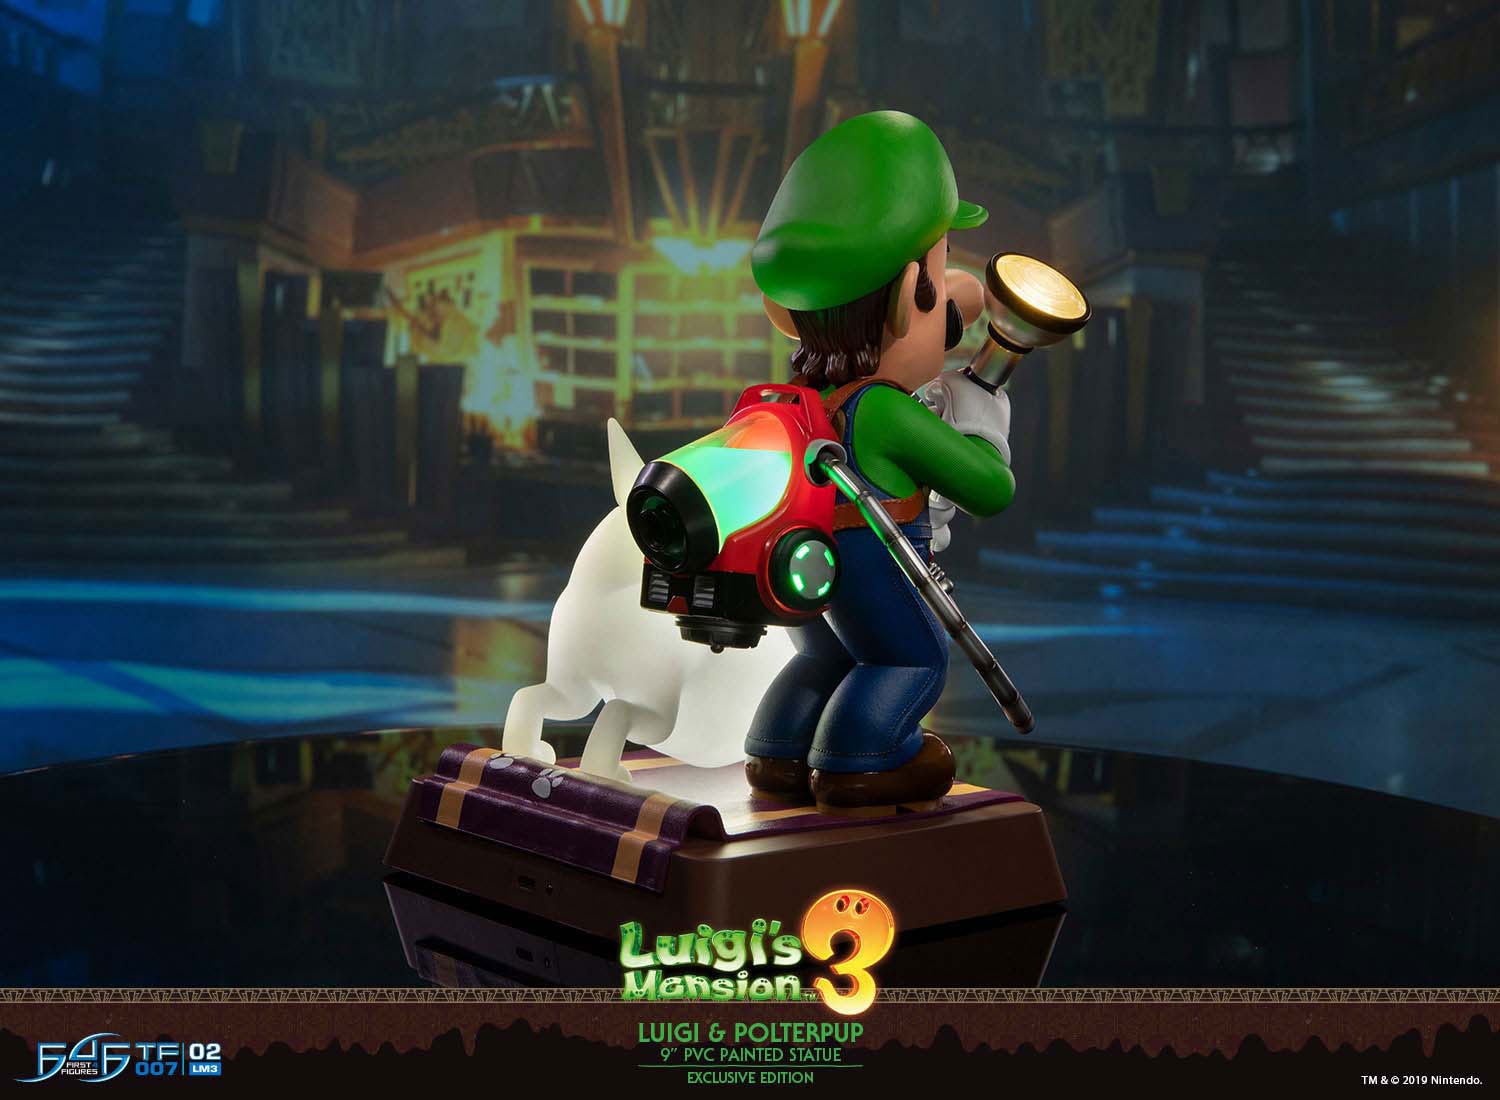  First 4 Figures Luigis Mansion 3 Luigi and Polterpup 9-Inch PVC  Collector Edition Statue, Green : Toys & Games